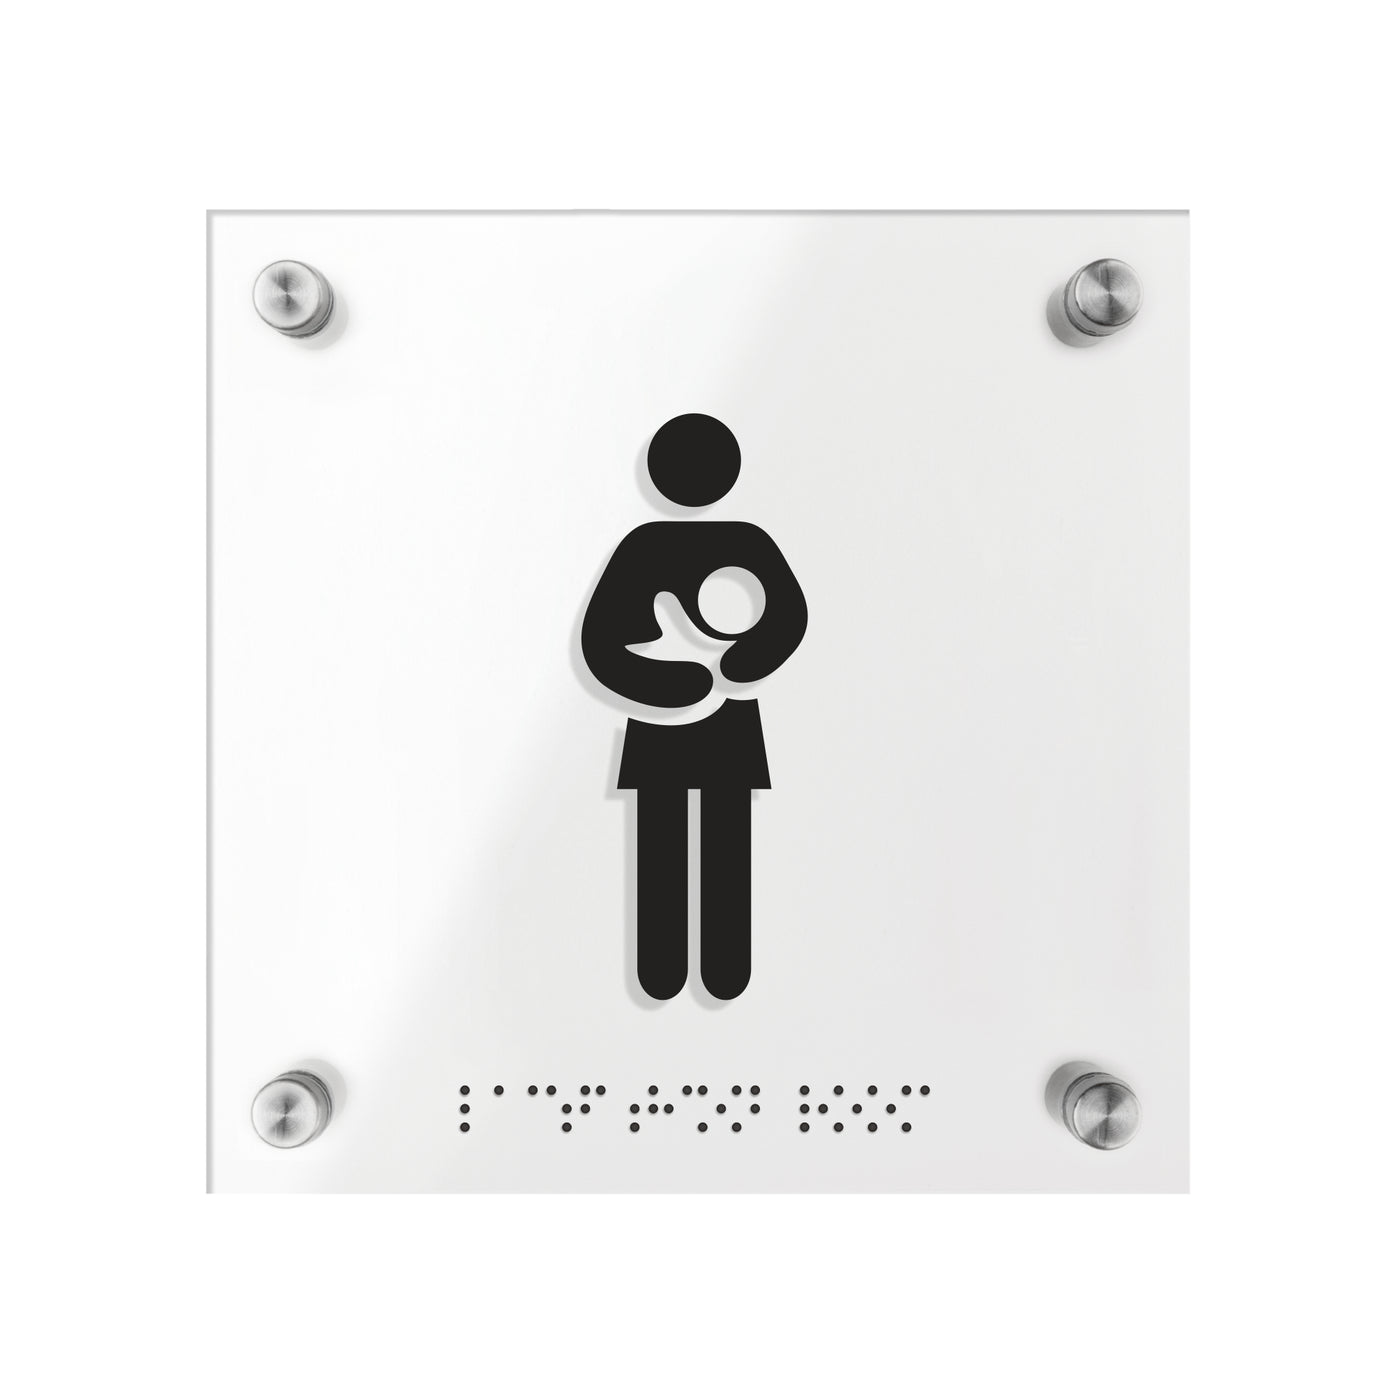 Mothers Room & Lactation Room Sign with Braille - "Classic" Design